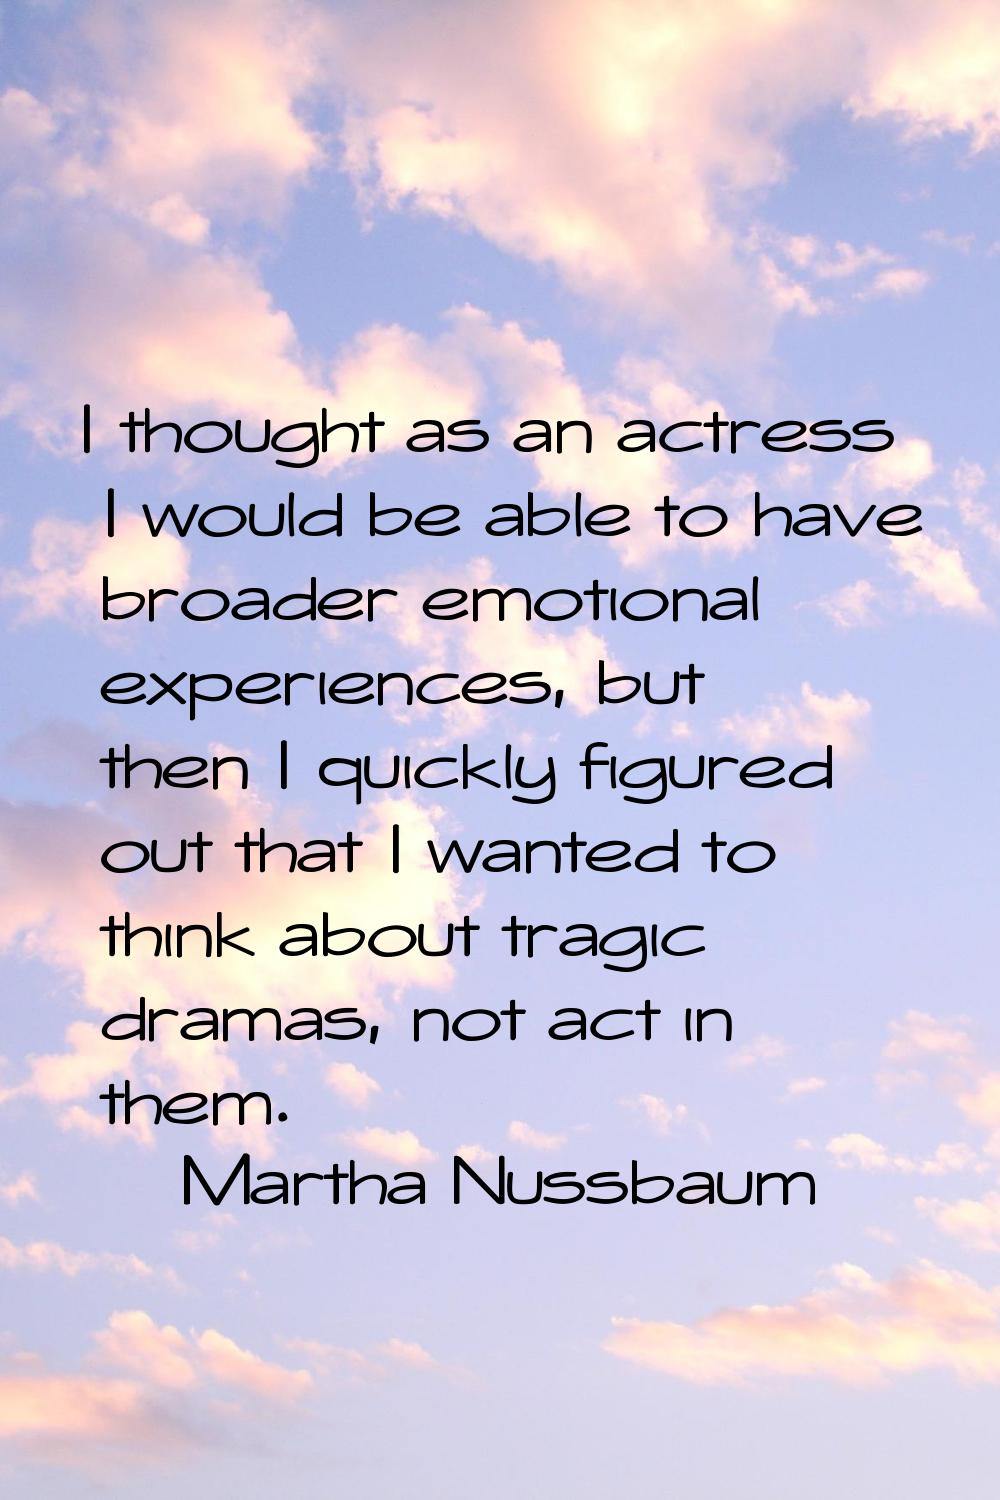 I thought as an actress I would be able to have broader emotional experiences, but then I quickly f